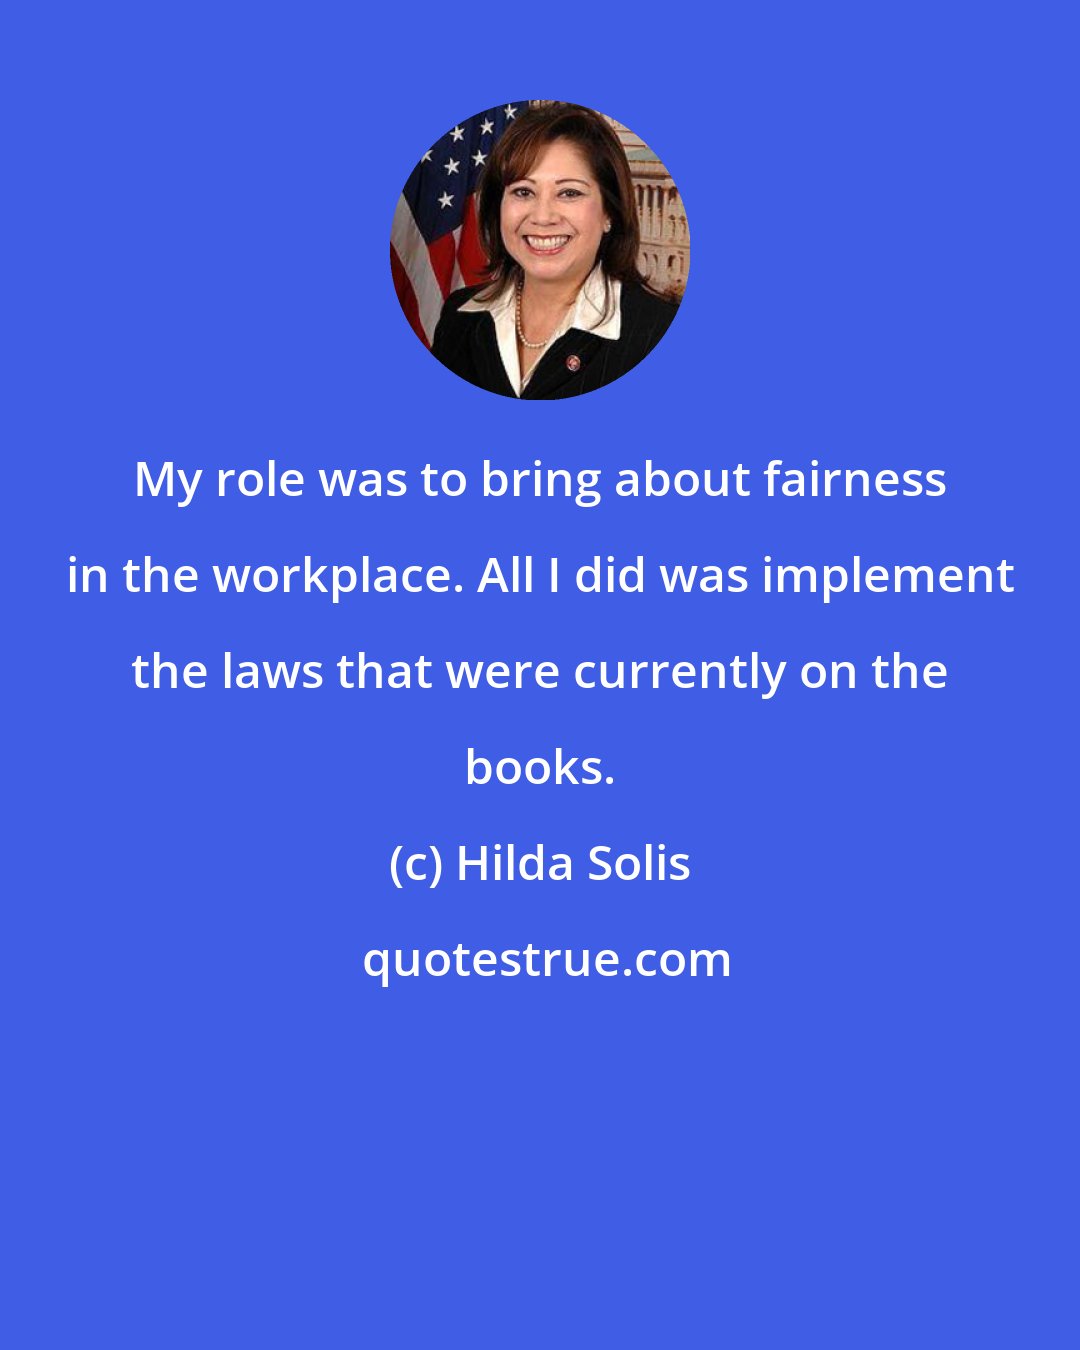 Hilda Solis: My role was to bring about fairness in the workplace. All I did was implement the laws that were currently on the books.